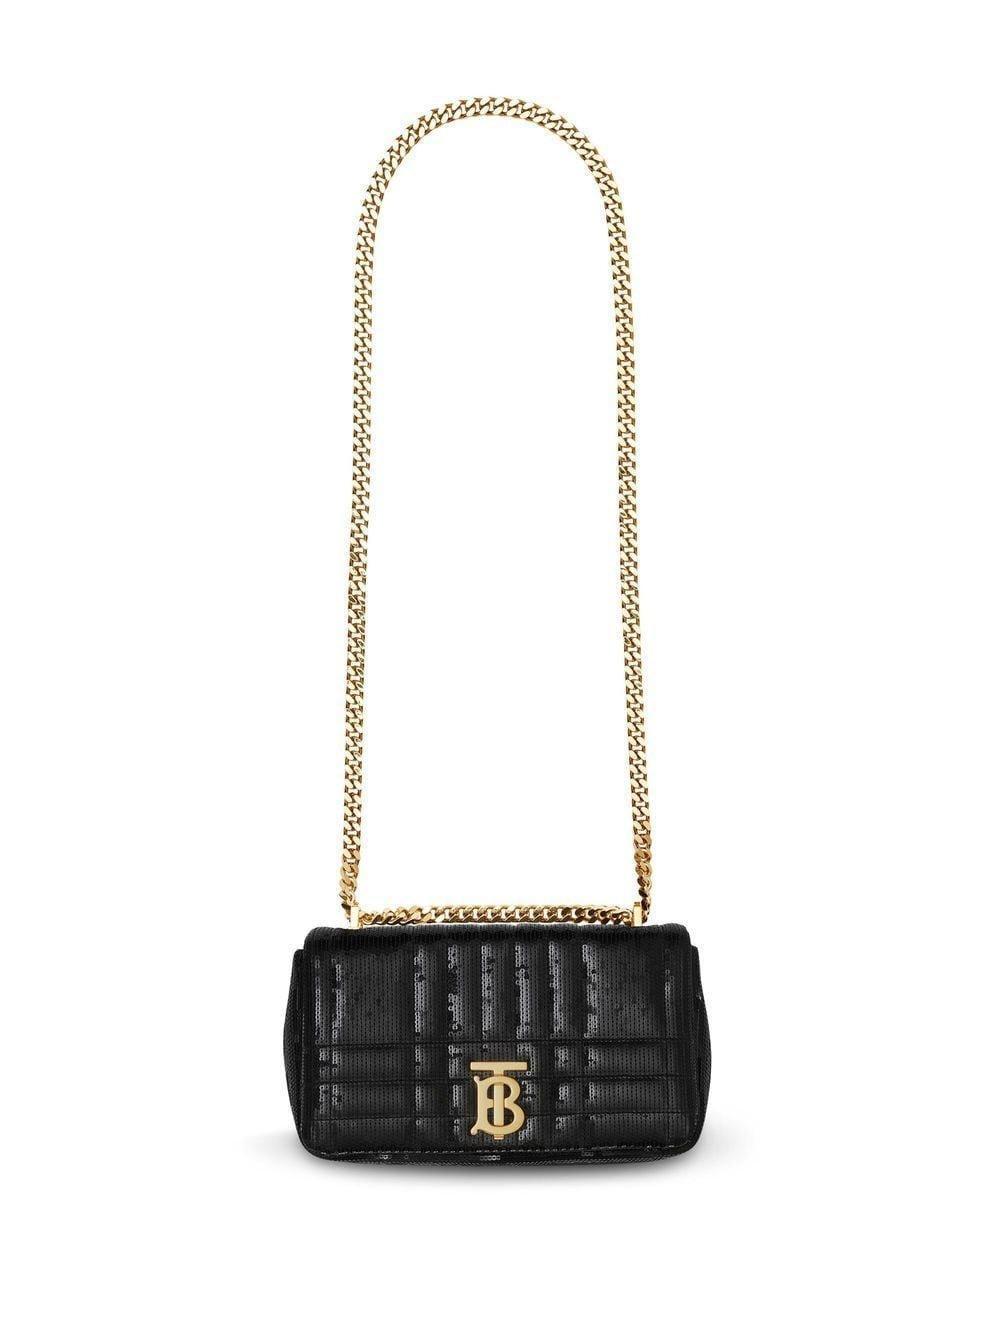 Burberry Sequinned Quilted Small Lola Bag in Black